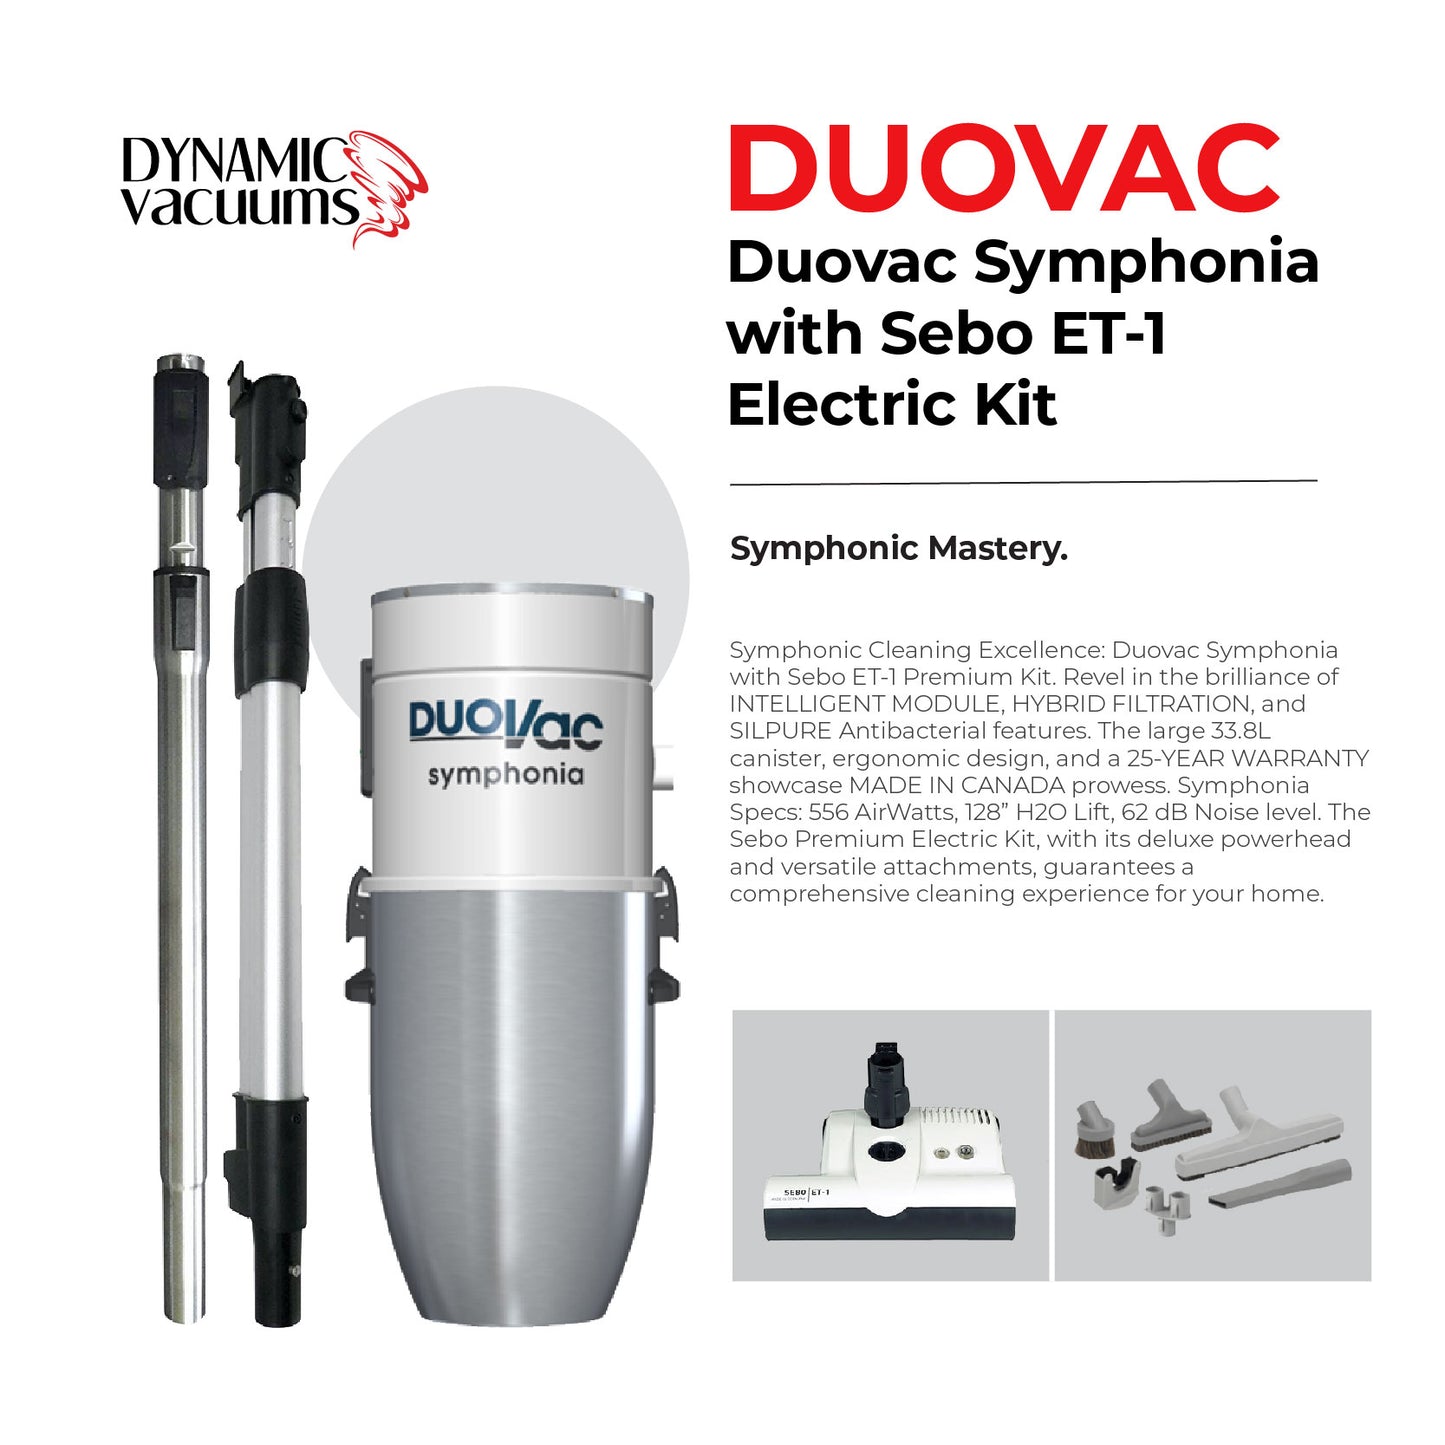 Duovac Symphonia with Sebo ET-1 Electric Kit